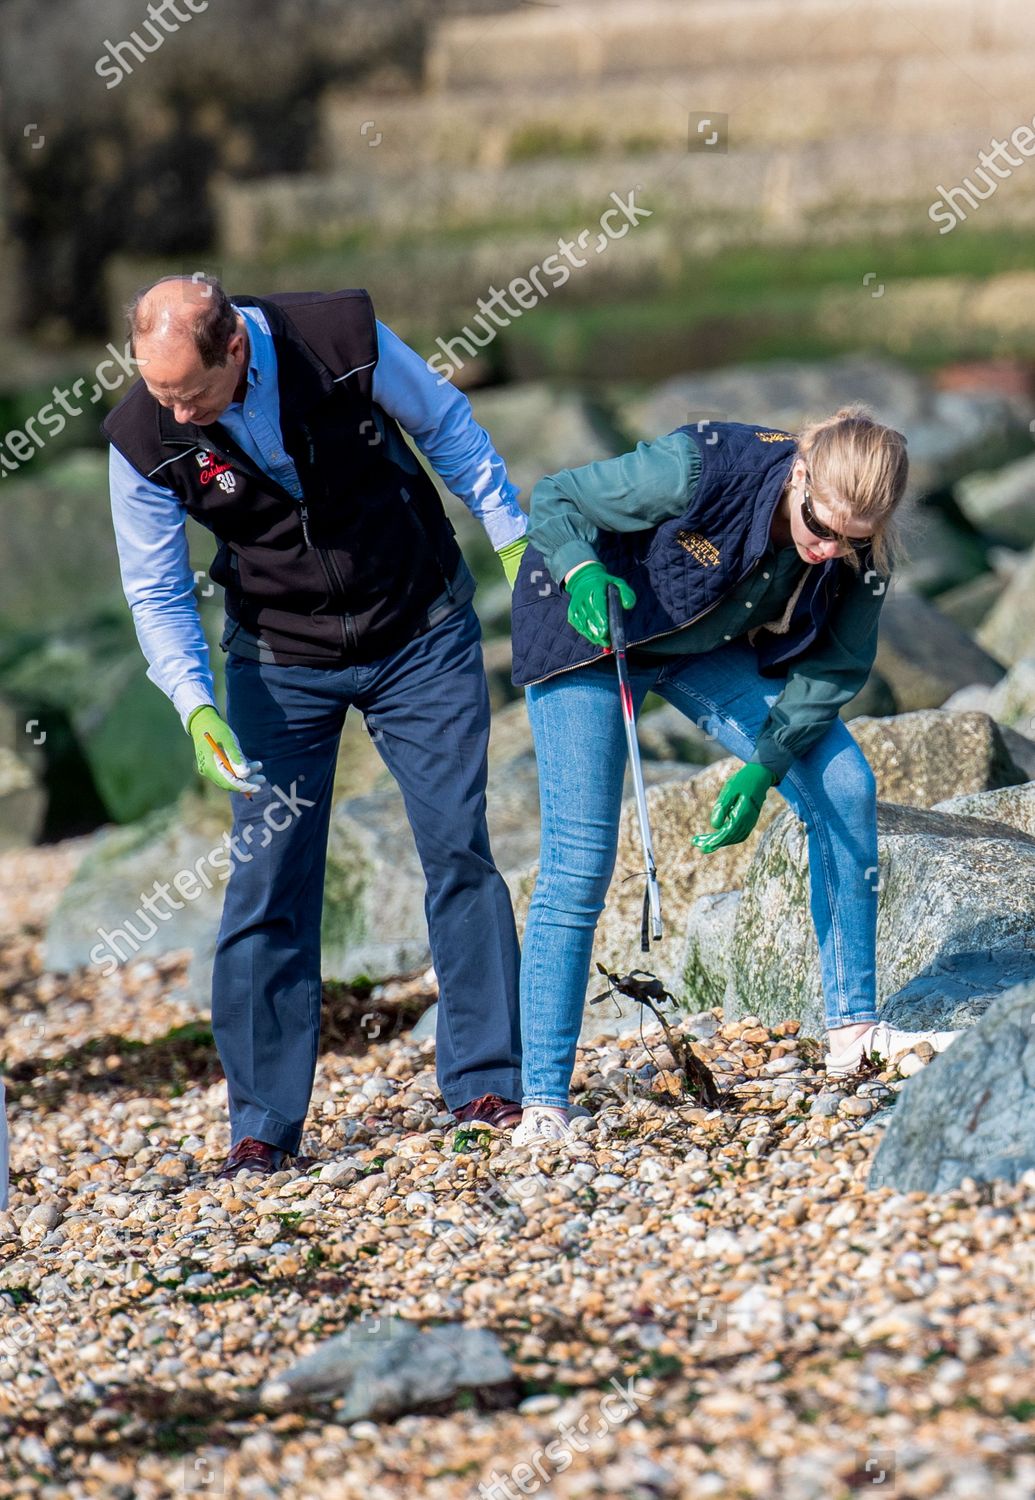 prince-edward-and-sophie-countess-of-wessex-great-british-beach-clean-southsea-beach-portsmouth-uk-shutterstock-editorial-10782998cn.jpg